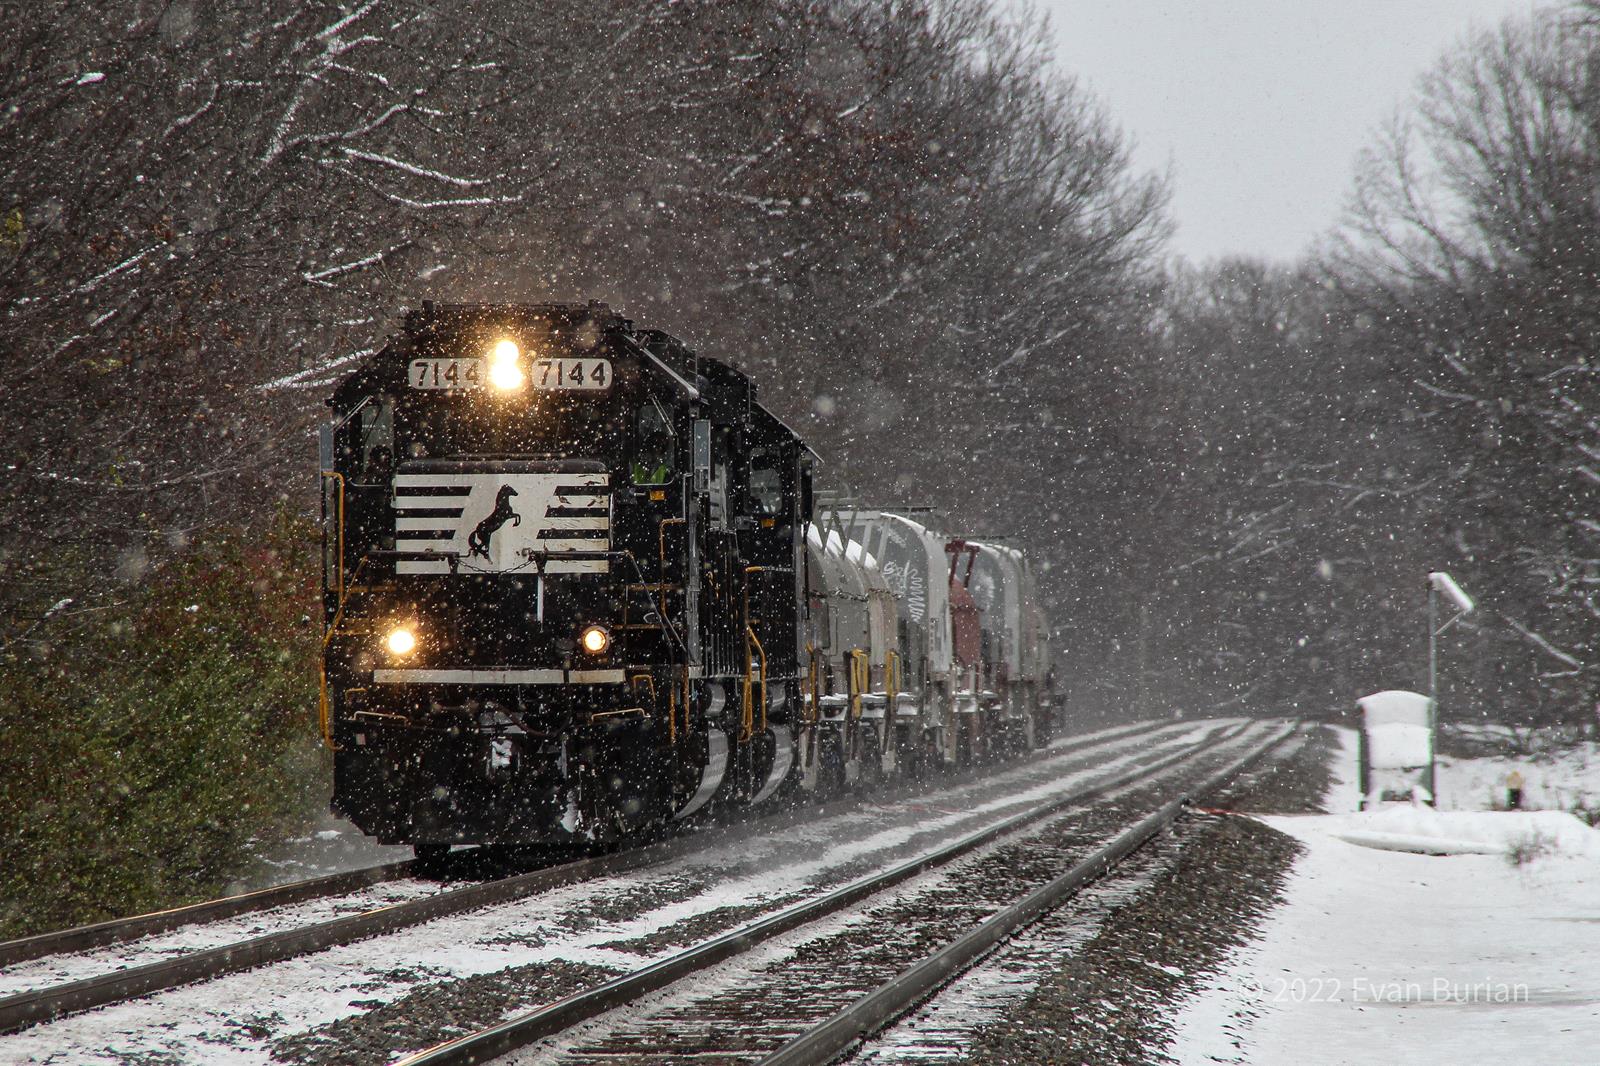 NS 7144 is a class EMD GP60 and  is pictured in Laporte, Indiana, USA.  This was taken along the Chicago Line on the Norfolk Southern. Photo Copyright: Evan Burian uploaded to Railroad Gallery on 11/25/2022. This photograph of NS 7144 was taken on Friday, November 18, 2022. All Rights Reserved. 